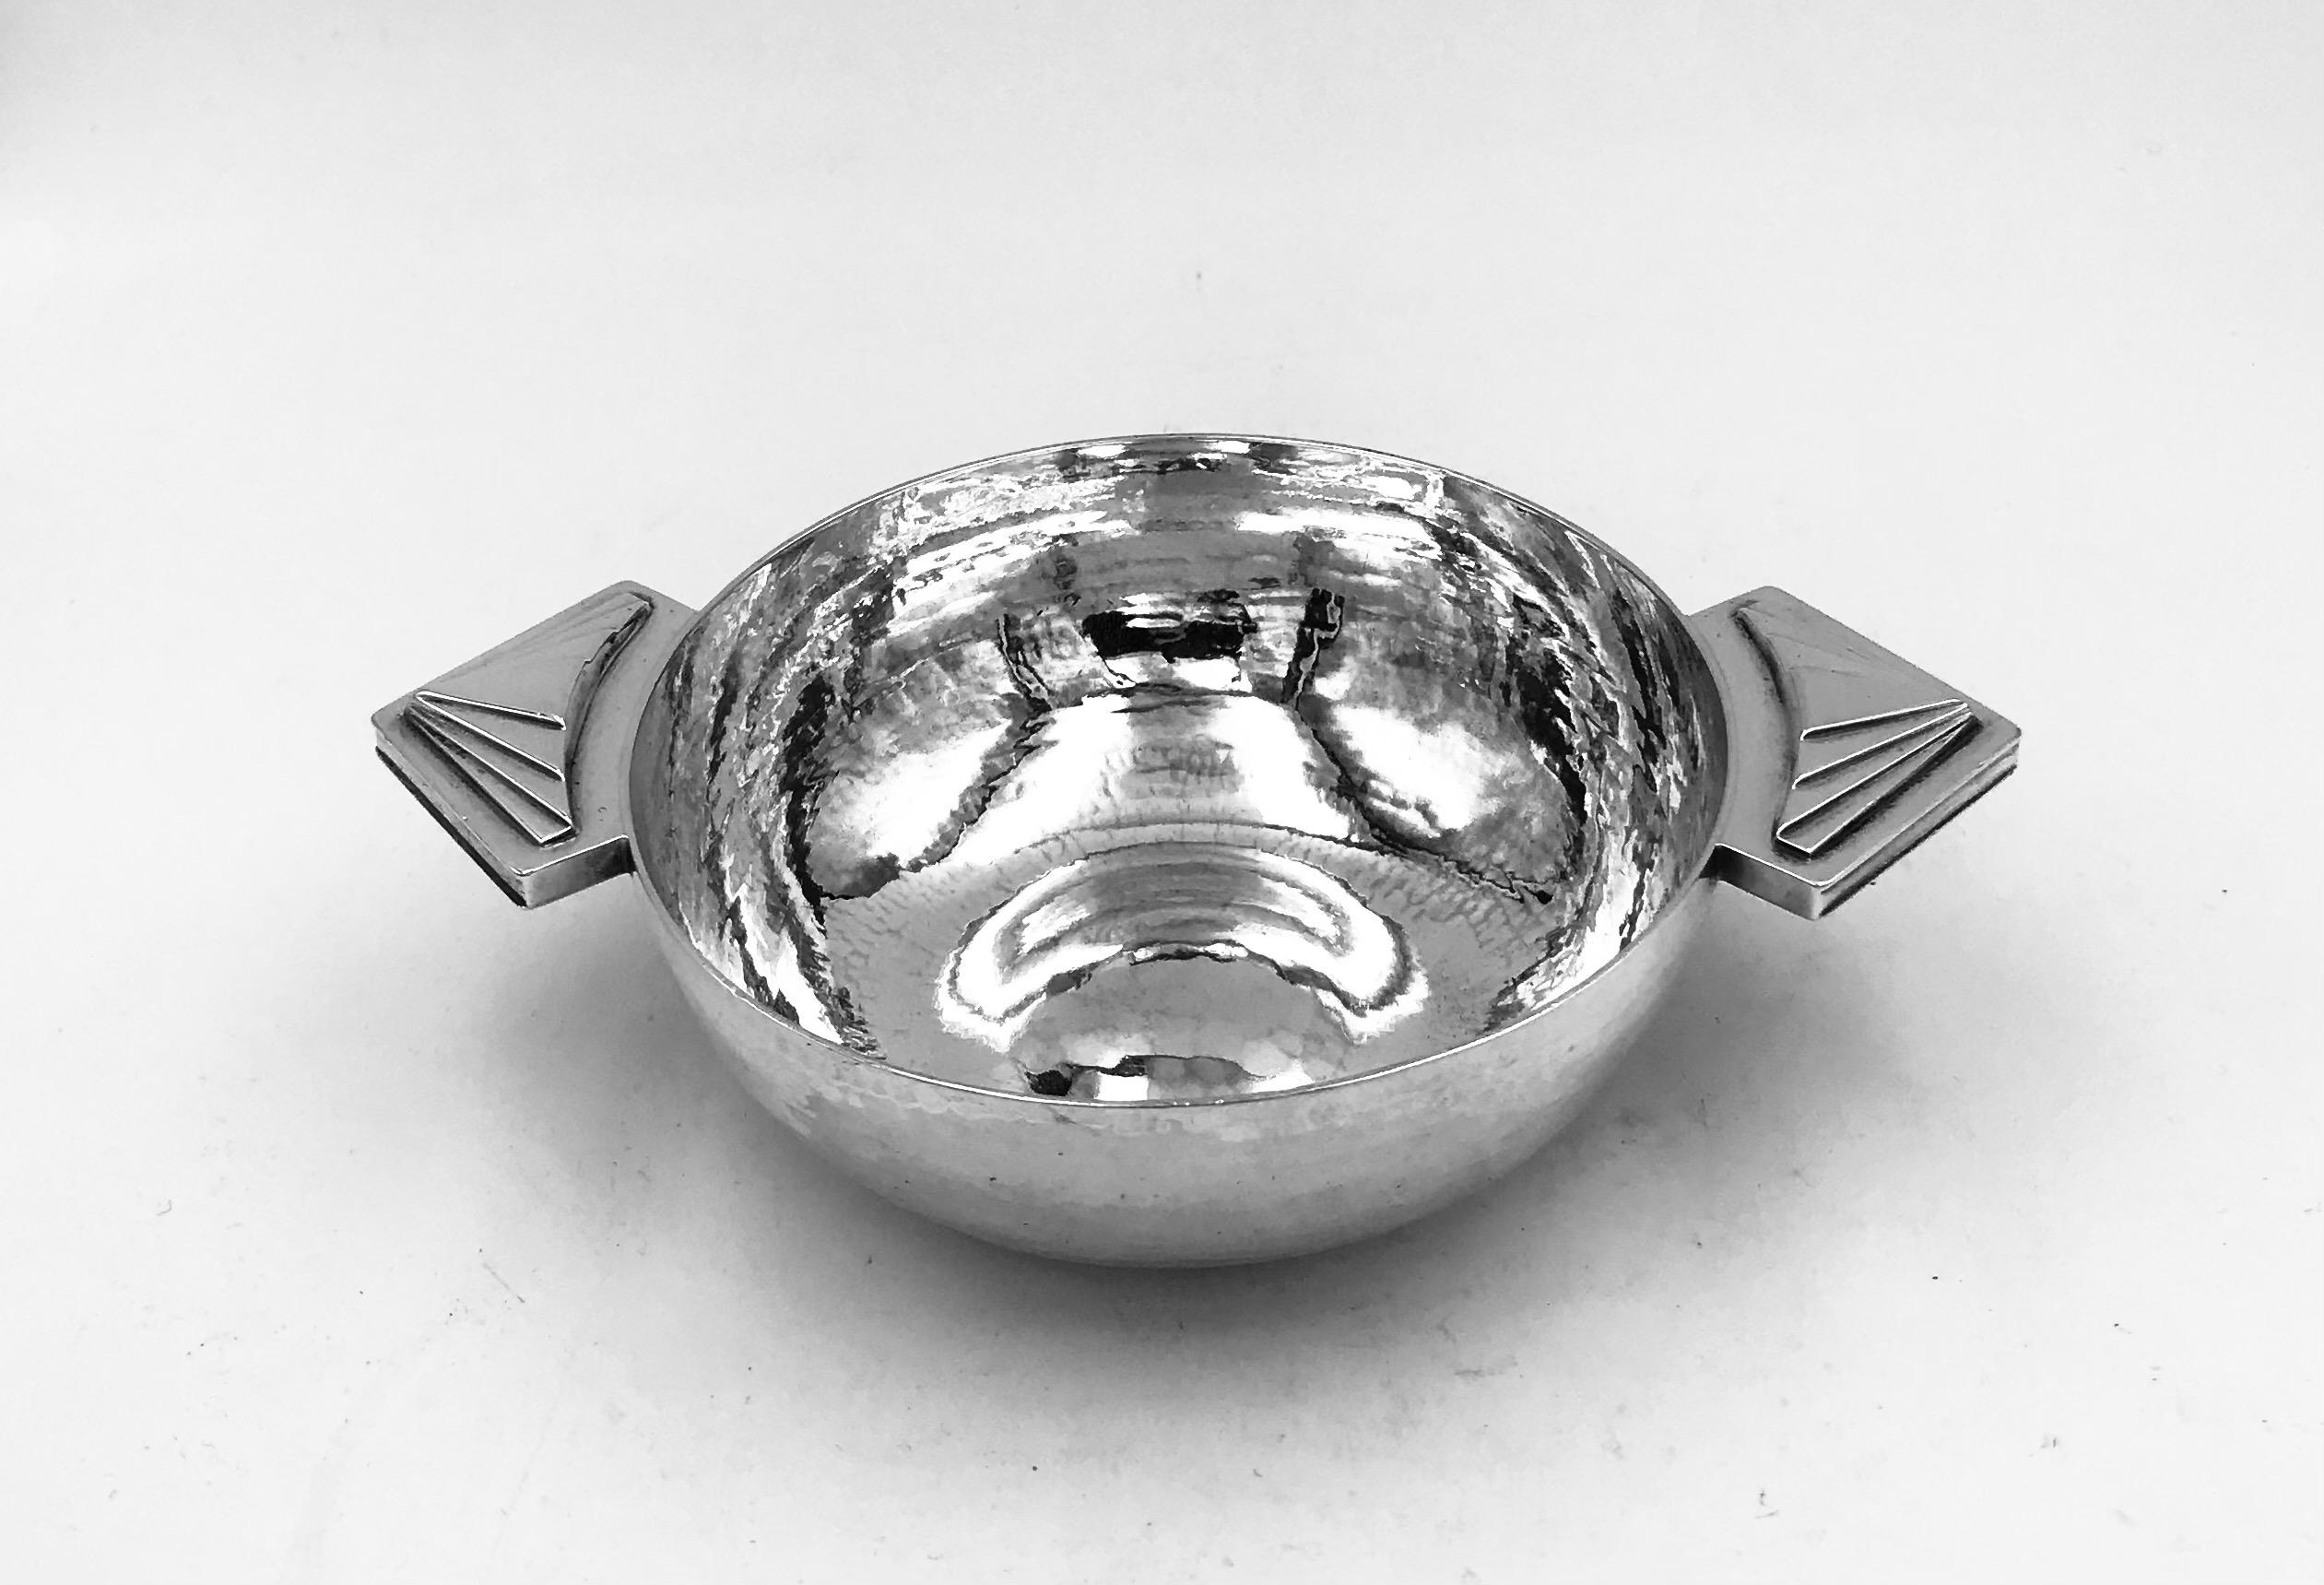 An Art Deco English silver bowl, hallmarked London 1932, designed by Robert Edgar Stone (1903-1990), and with his facsimile signature.
The diameter of the bowl is 10.5cm, and it measures 15.9cm across the handles